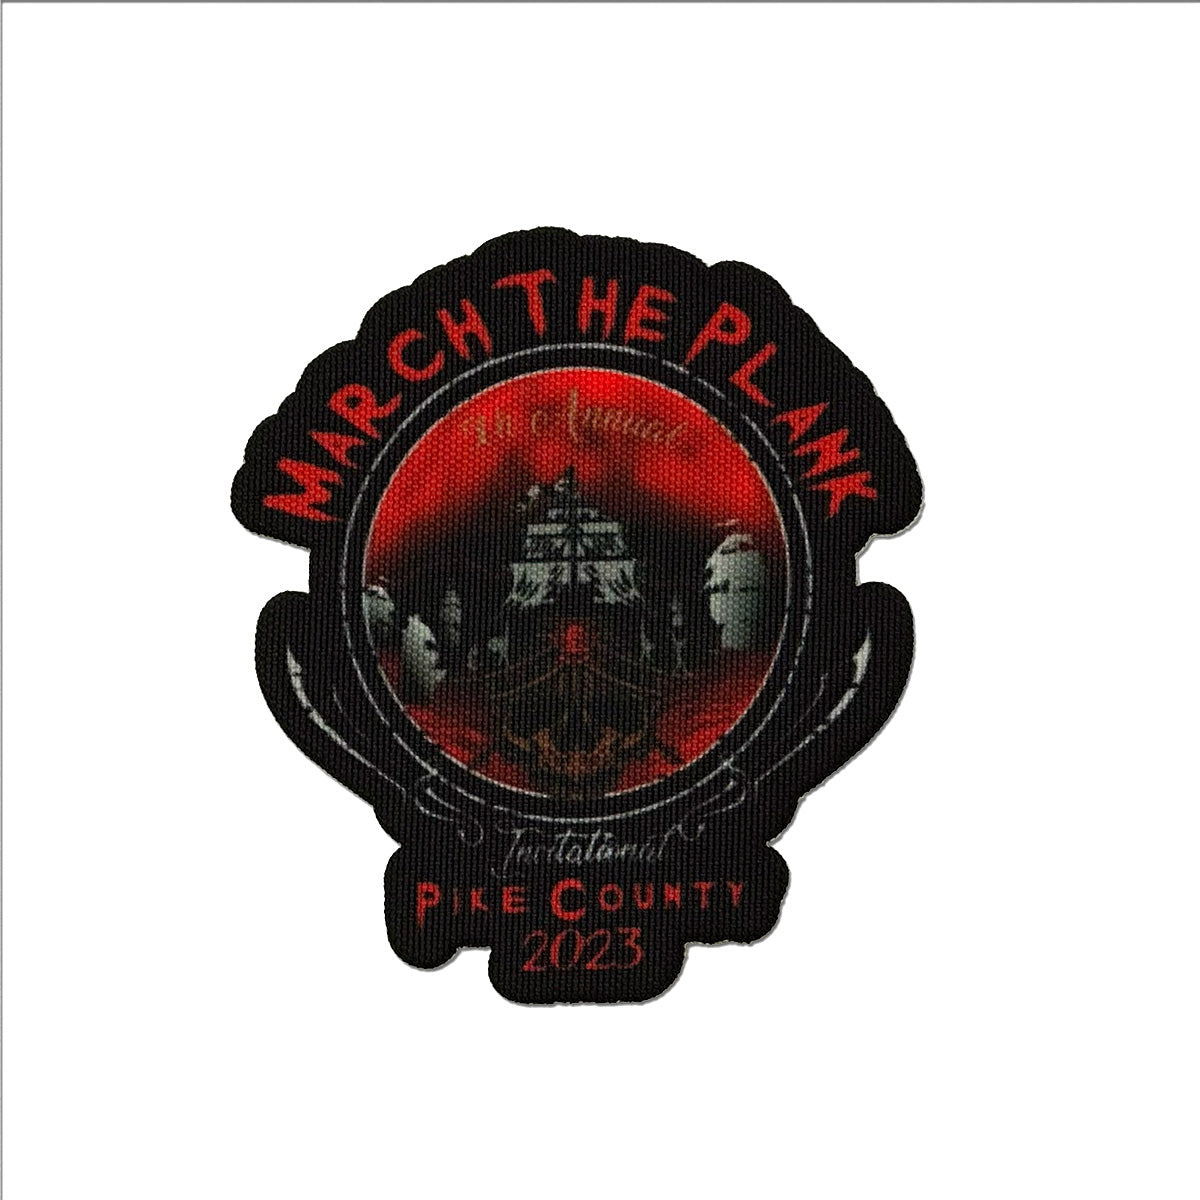 Pike County "March the Plank" 2023 Show Iron-on Patch. 